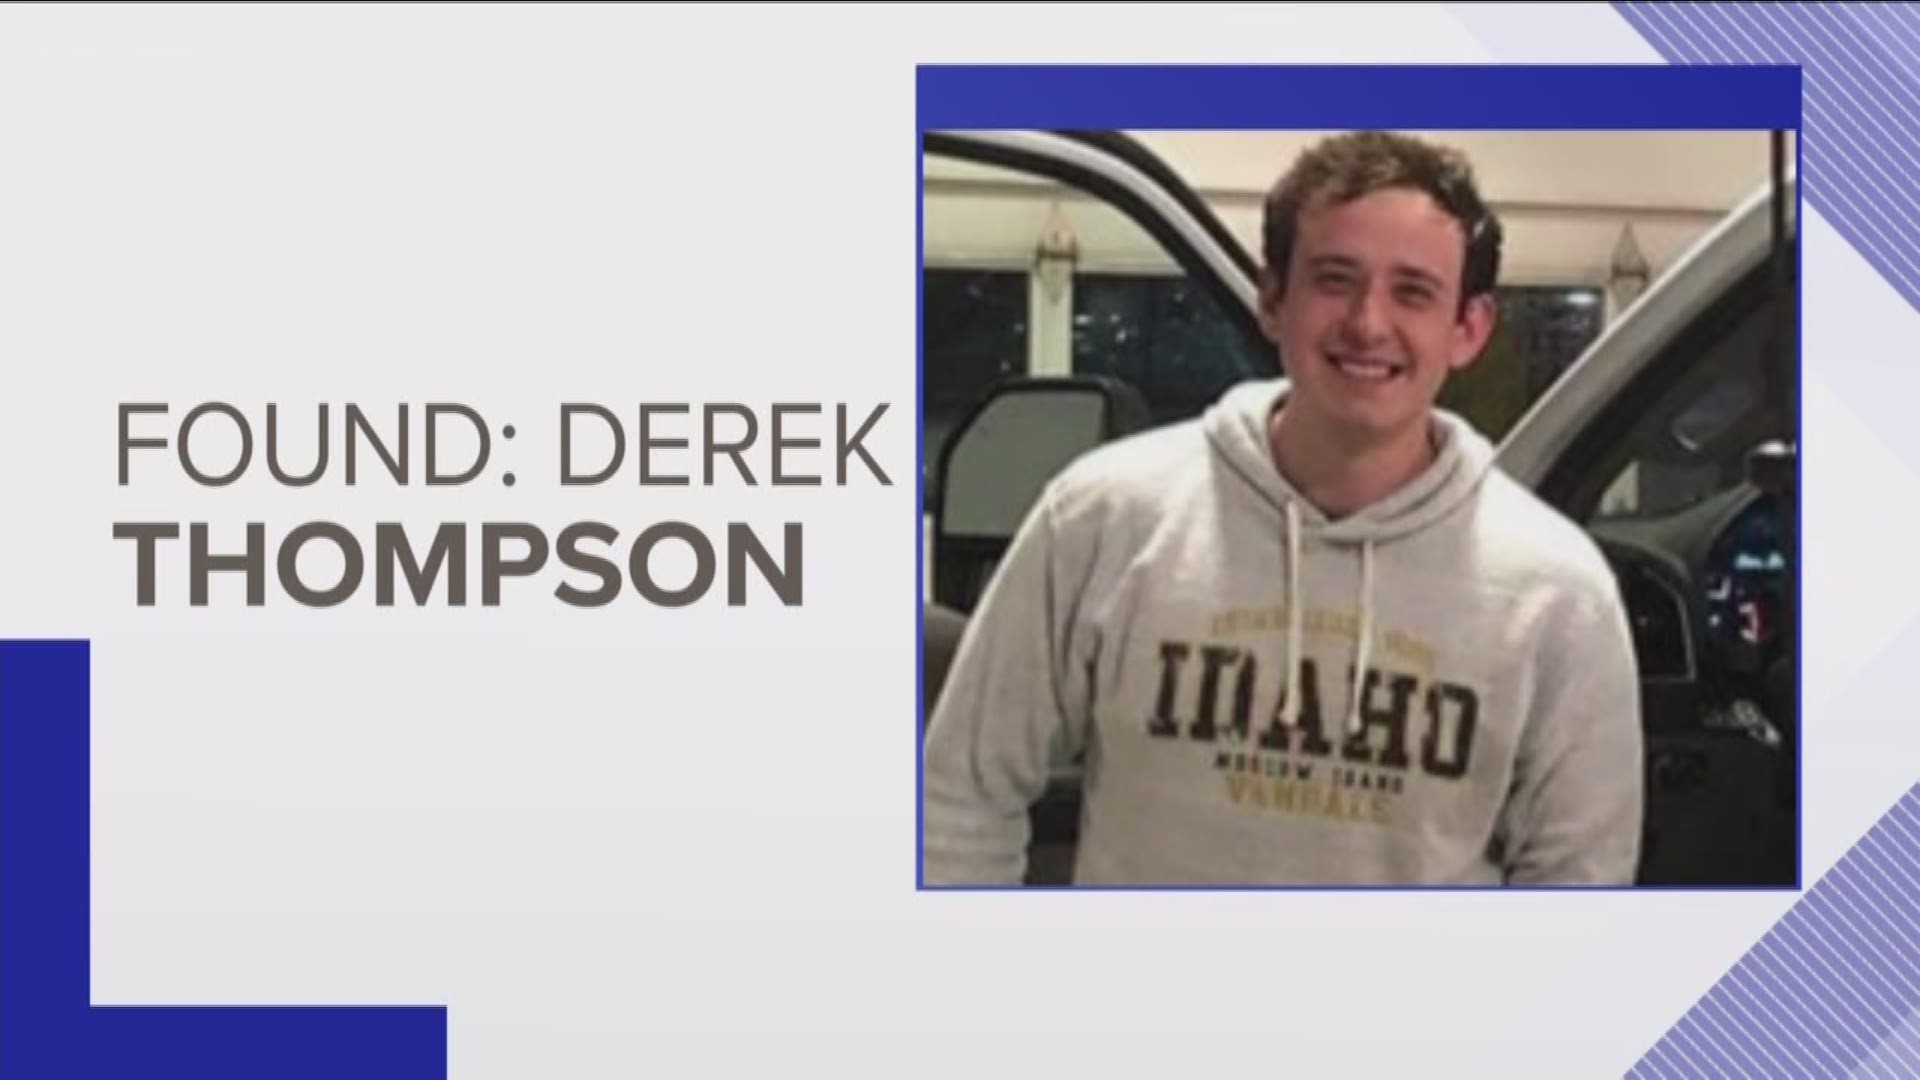 Derek Thompson was reported missing but was found safe in Spokane.